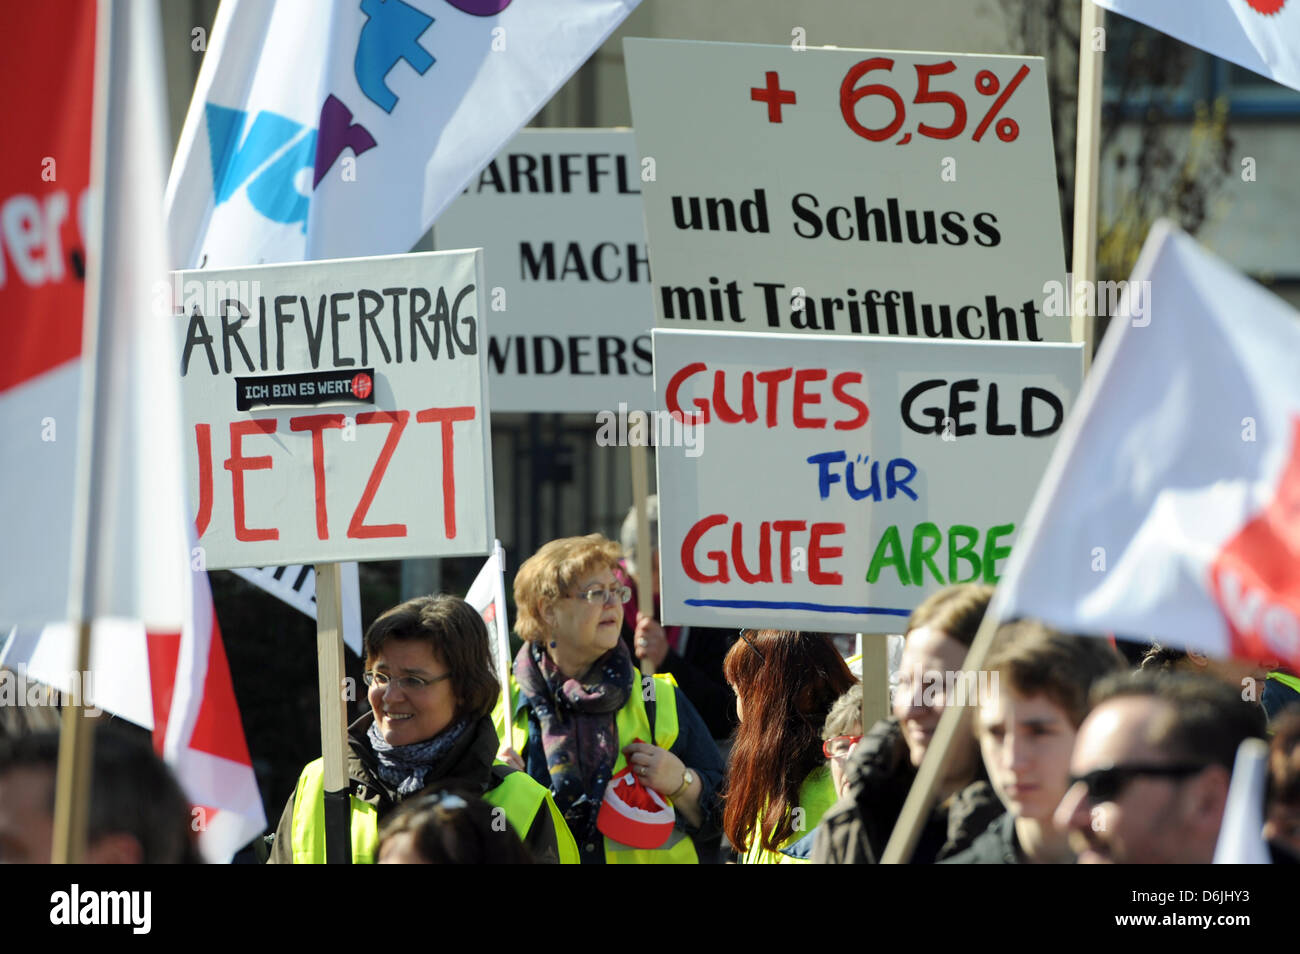 Public sector emplyees are on strike in Frankfurt am Main, Germany, 20 March 2012. The next wave of warning strikes in the public service sector reaches Bavaria, Lower Saxony, Bremen and Hesse.  Foto: Boris Roessler Stock Photo